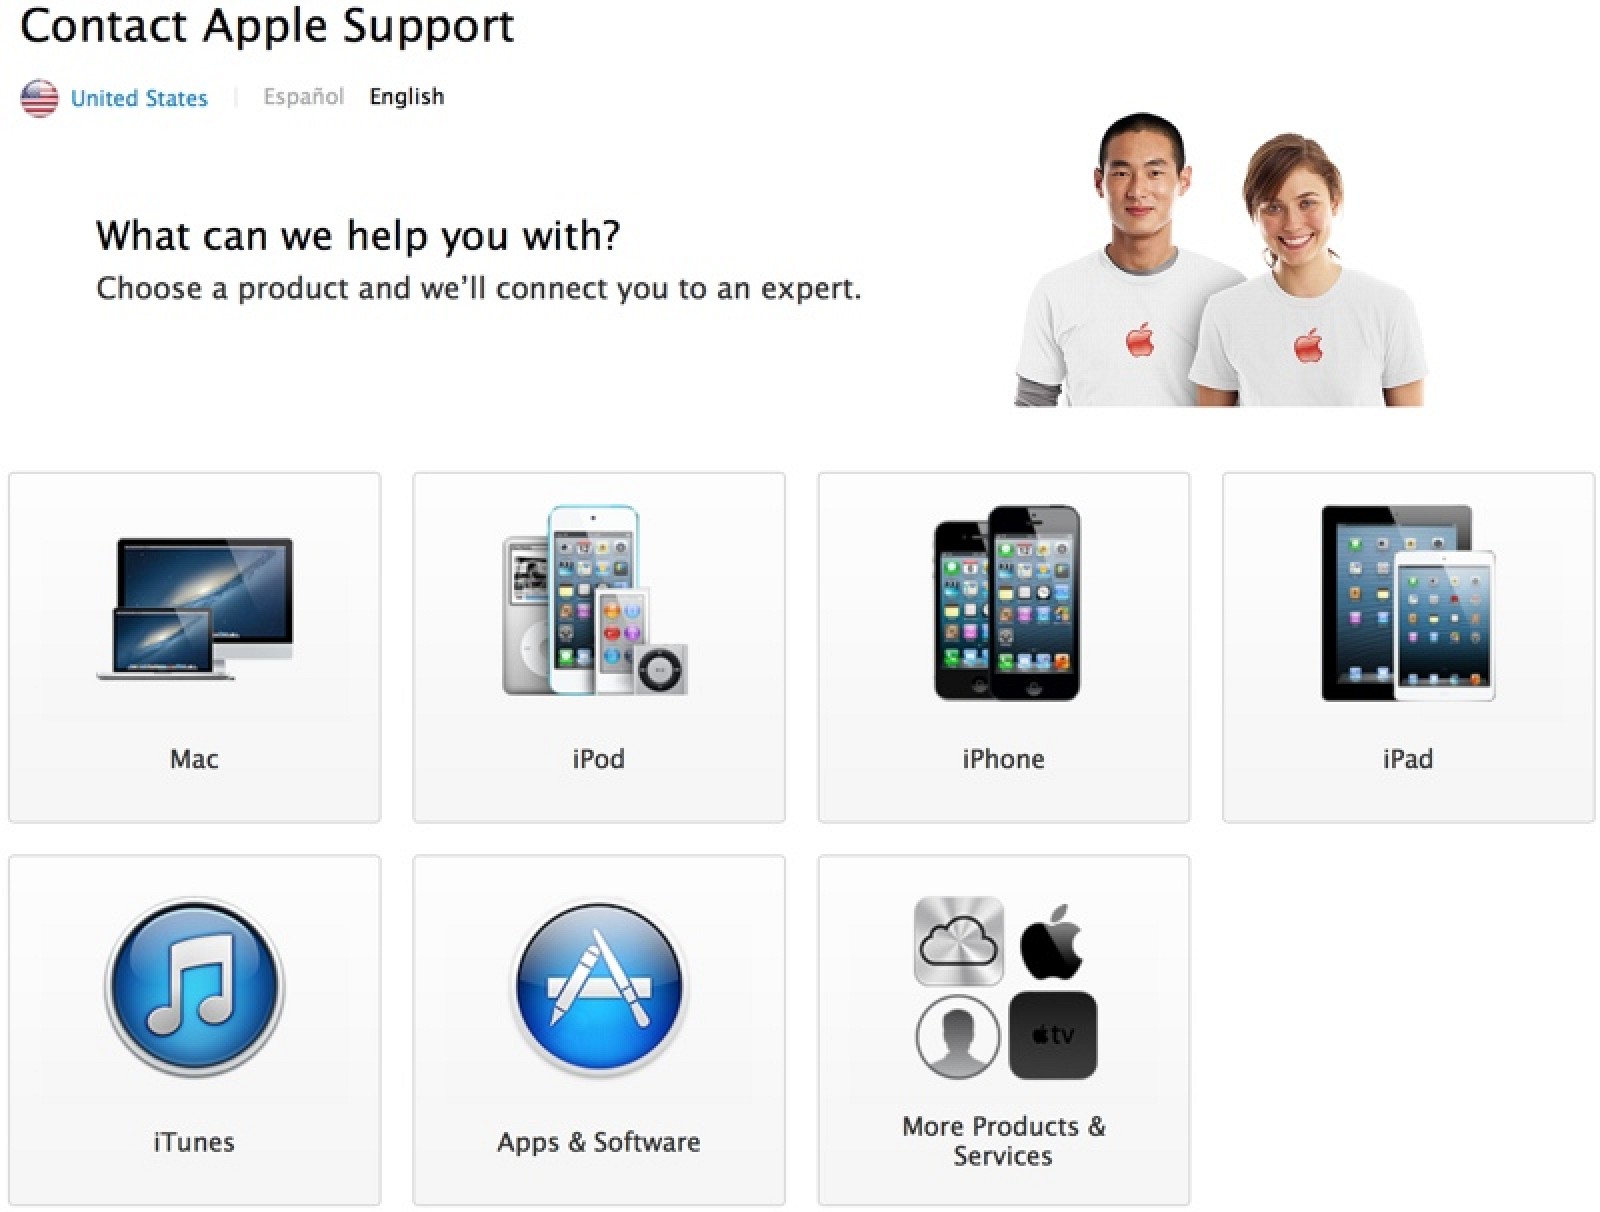 Apple Launches Redesigned AppleCare Website With 24/7 Live Chat Support